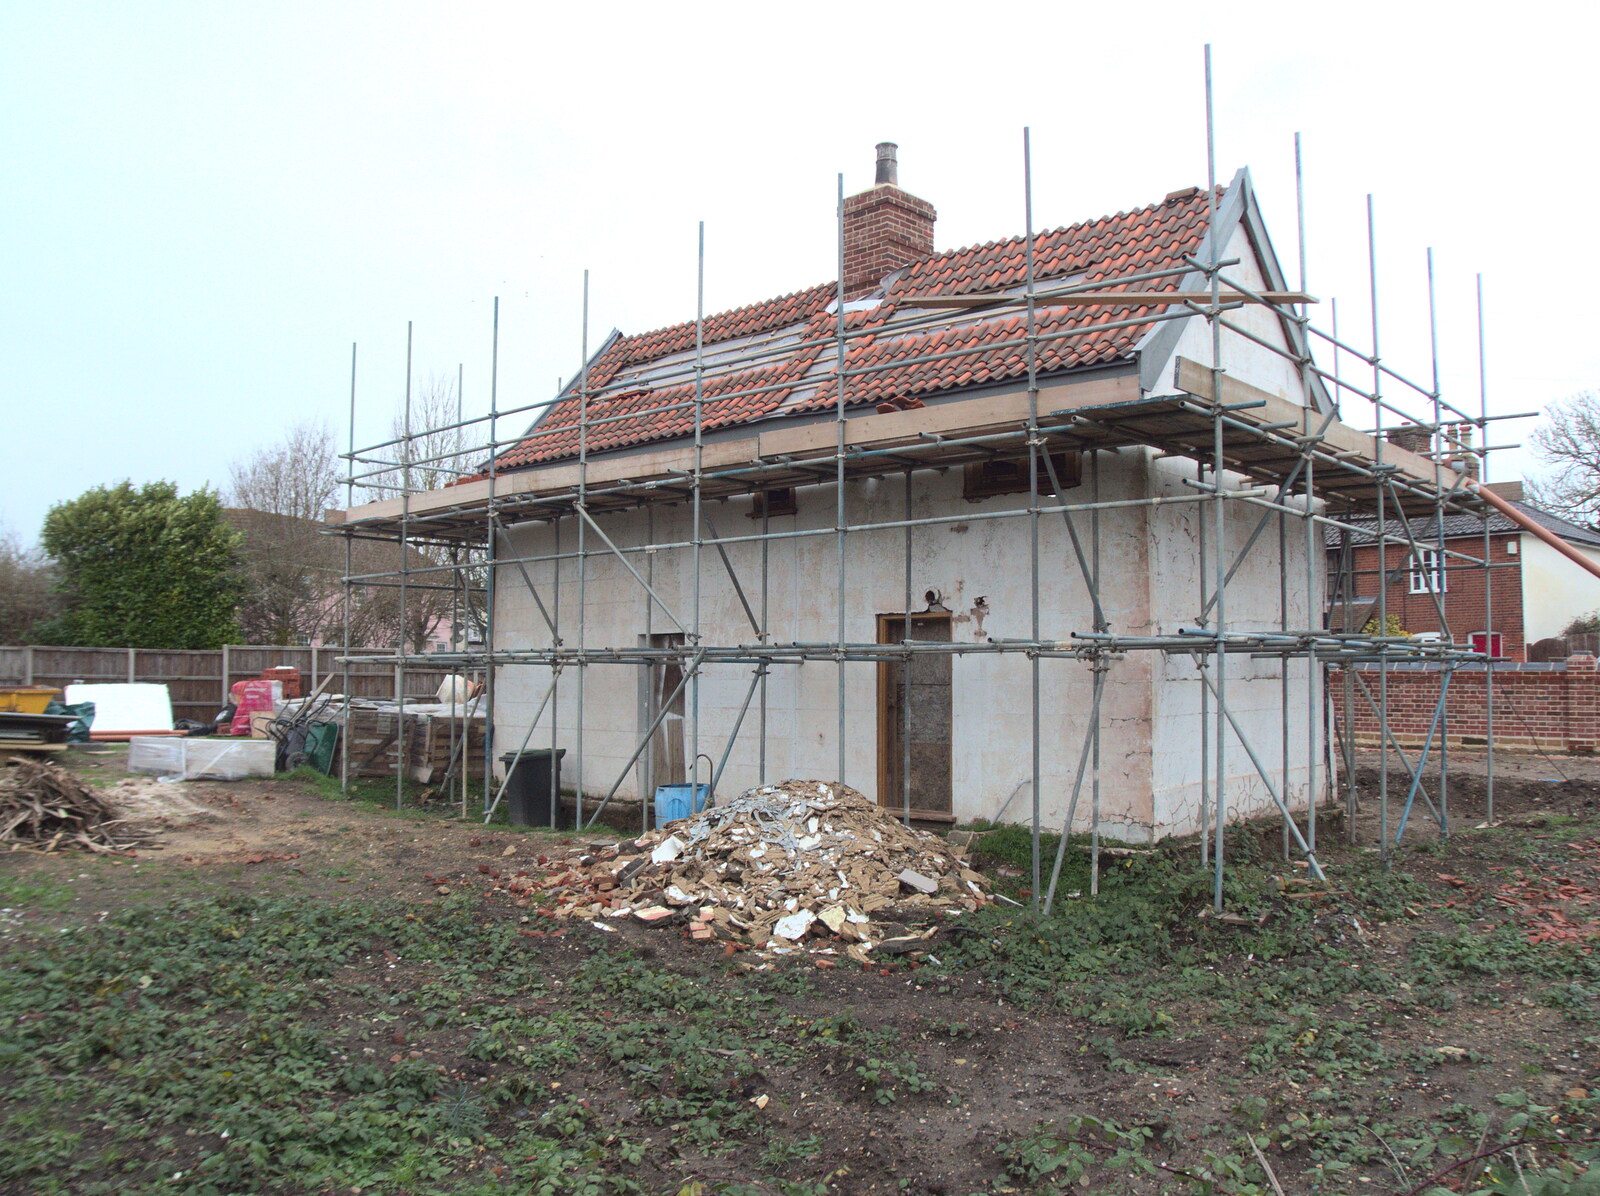 A Wander around Fair Green, Diss, Norfolk - 11th January 2023: Work on the old house on Lowgate Street has stopped